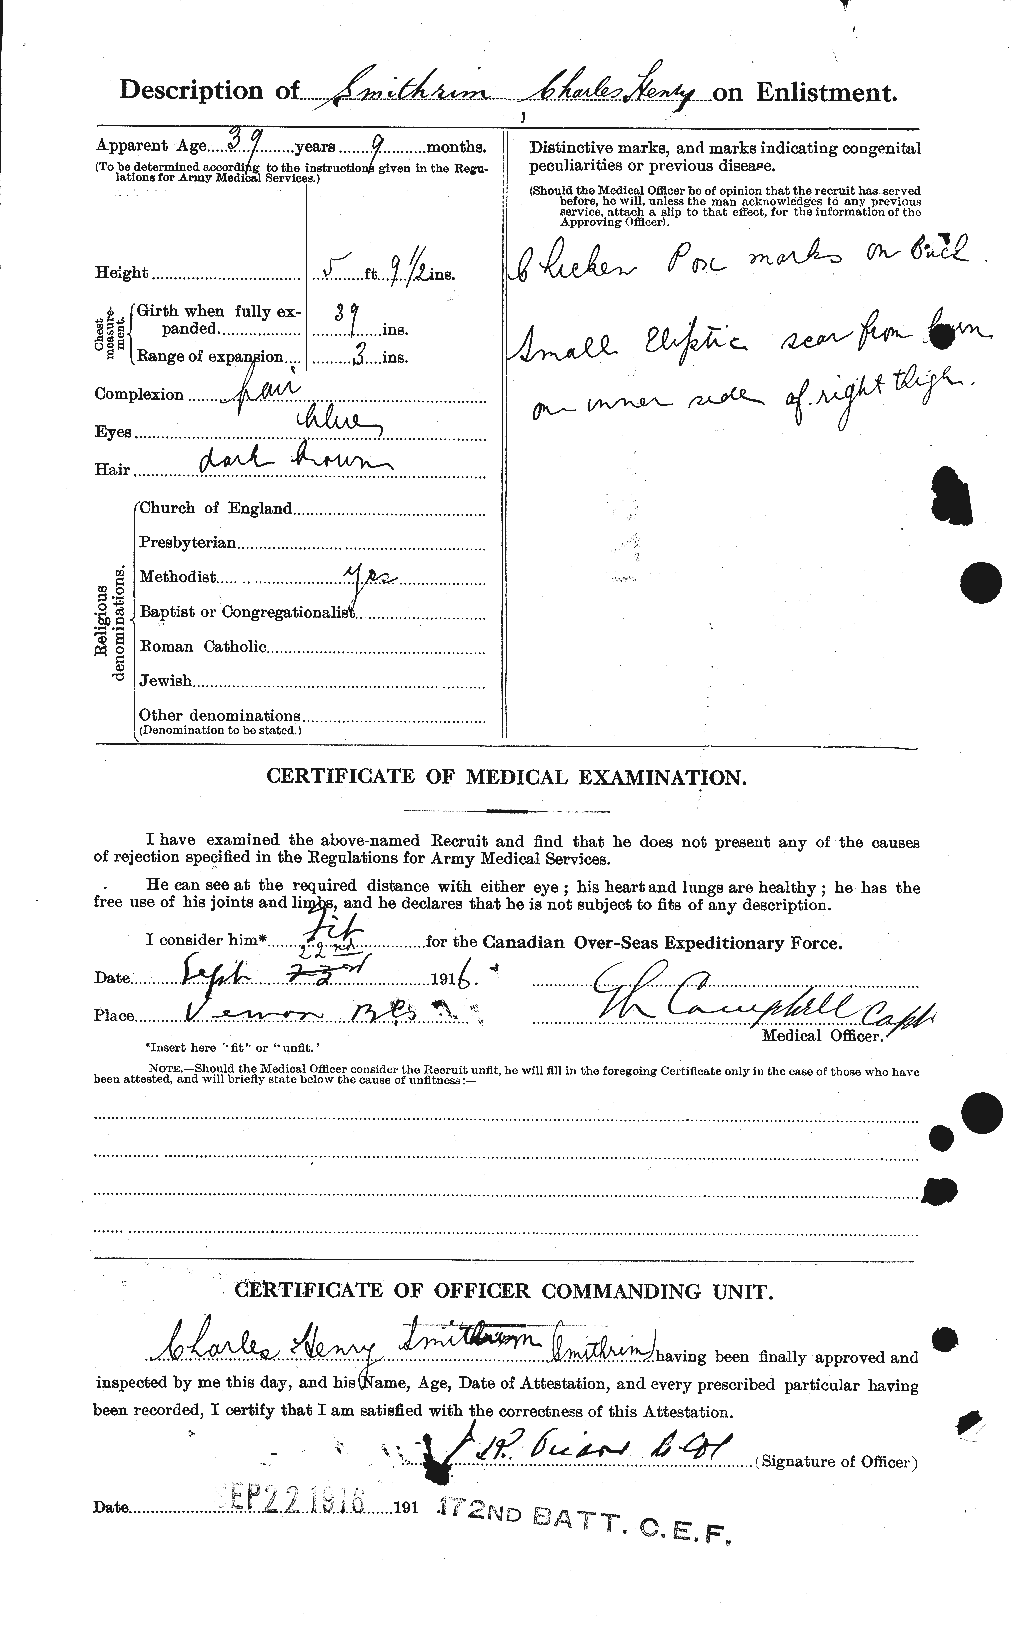 Personnel Records of the First World War - CEF 107210b